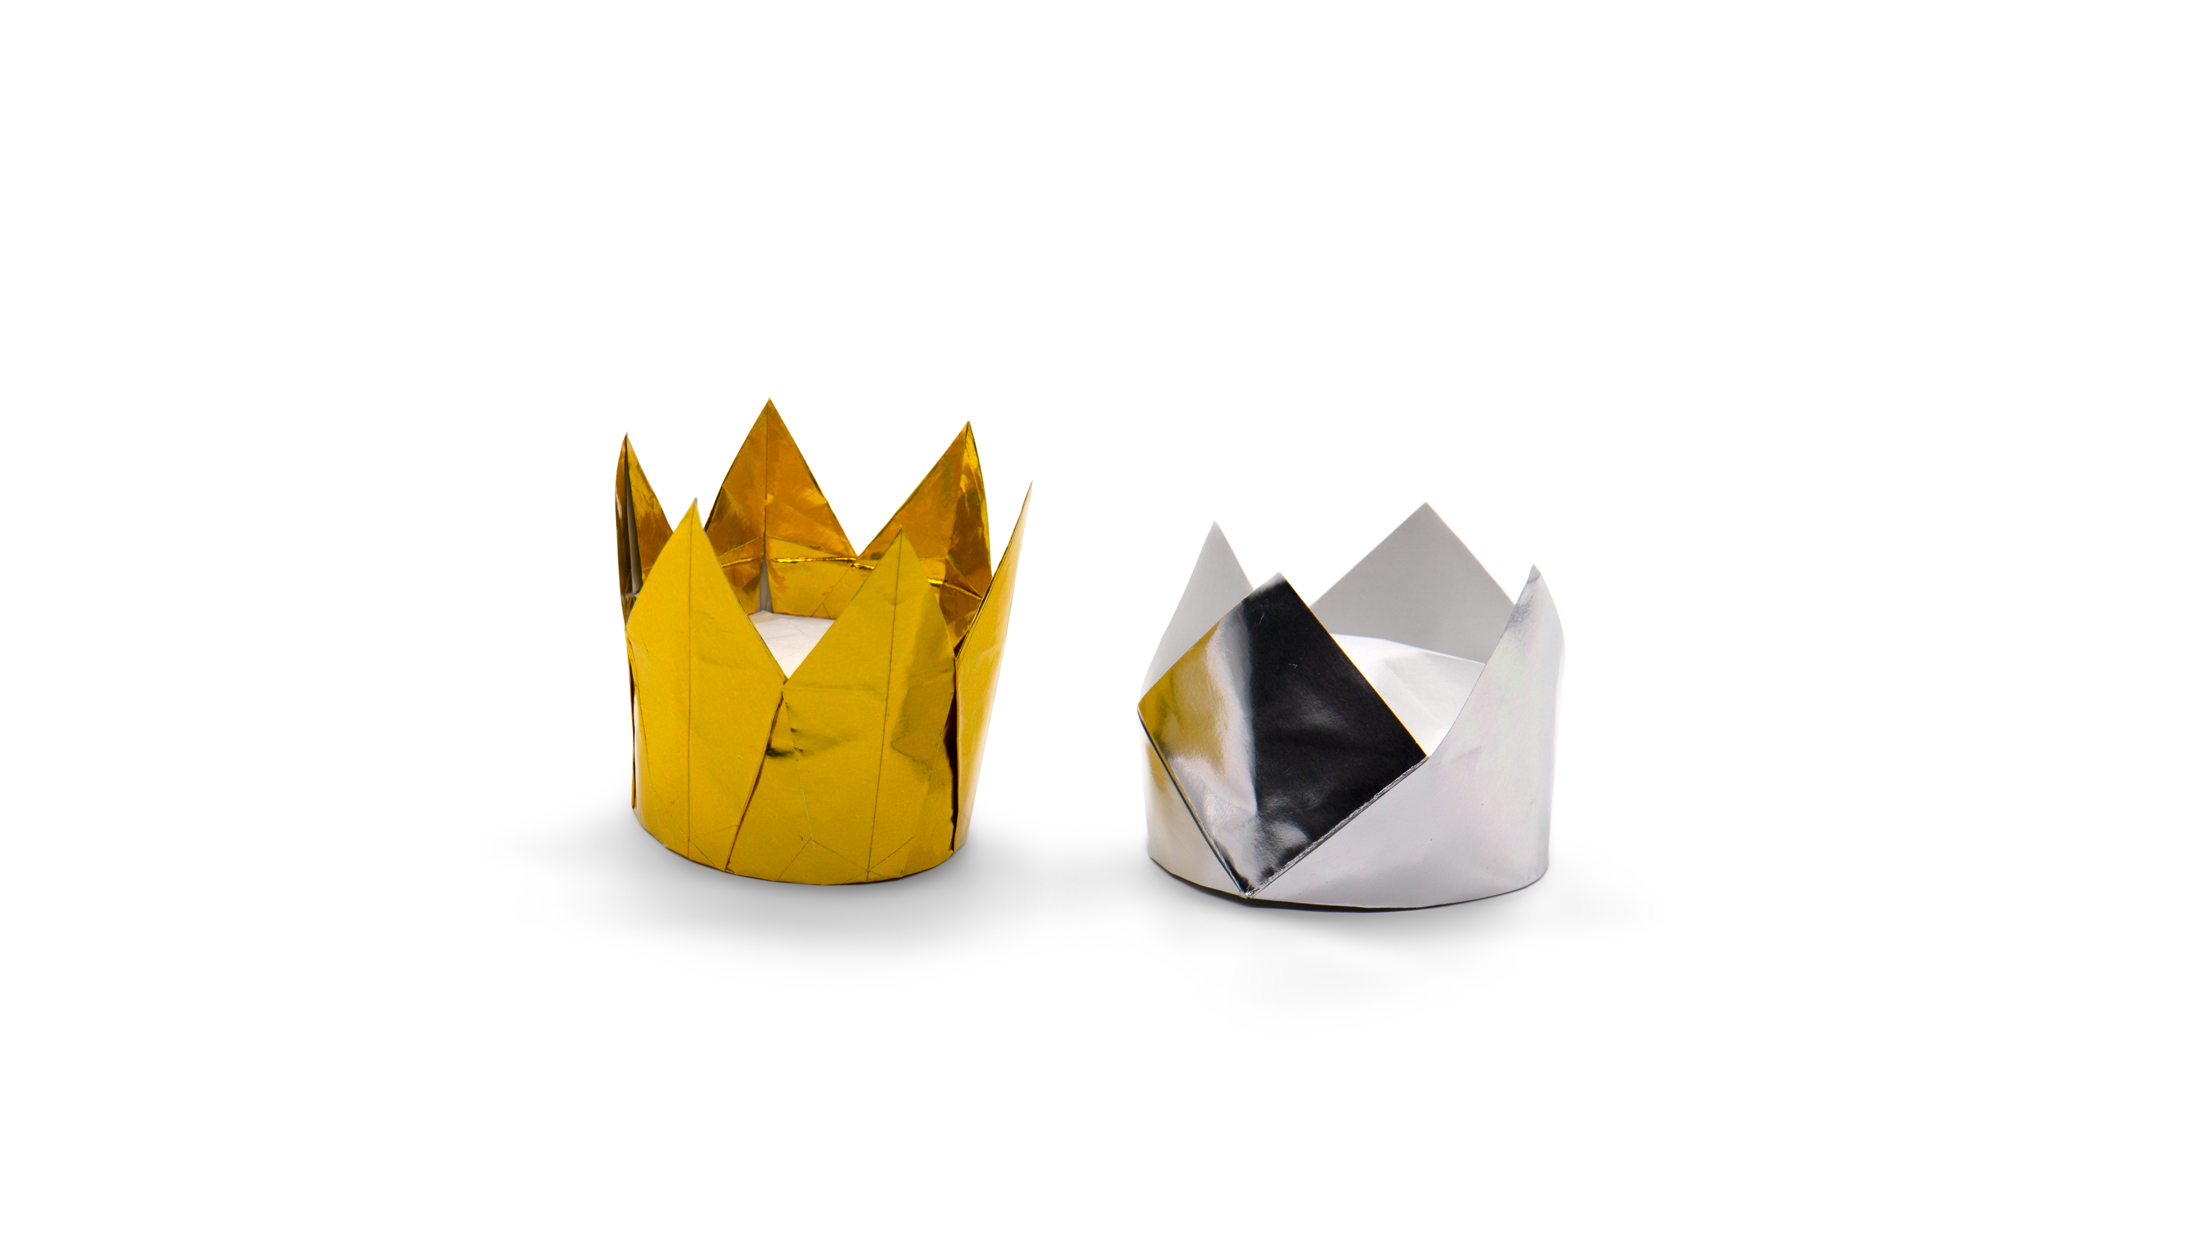 the six pointed crown in gold next to the traditional origami crown in silver